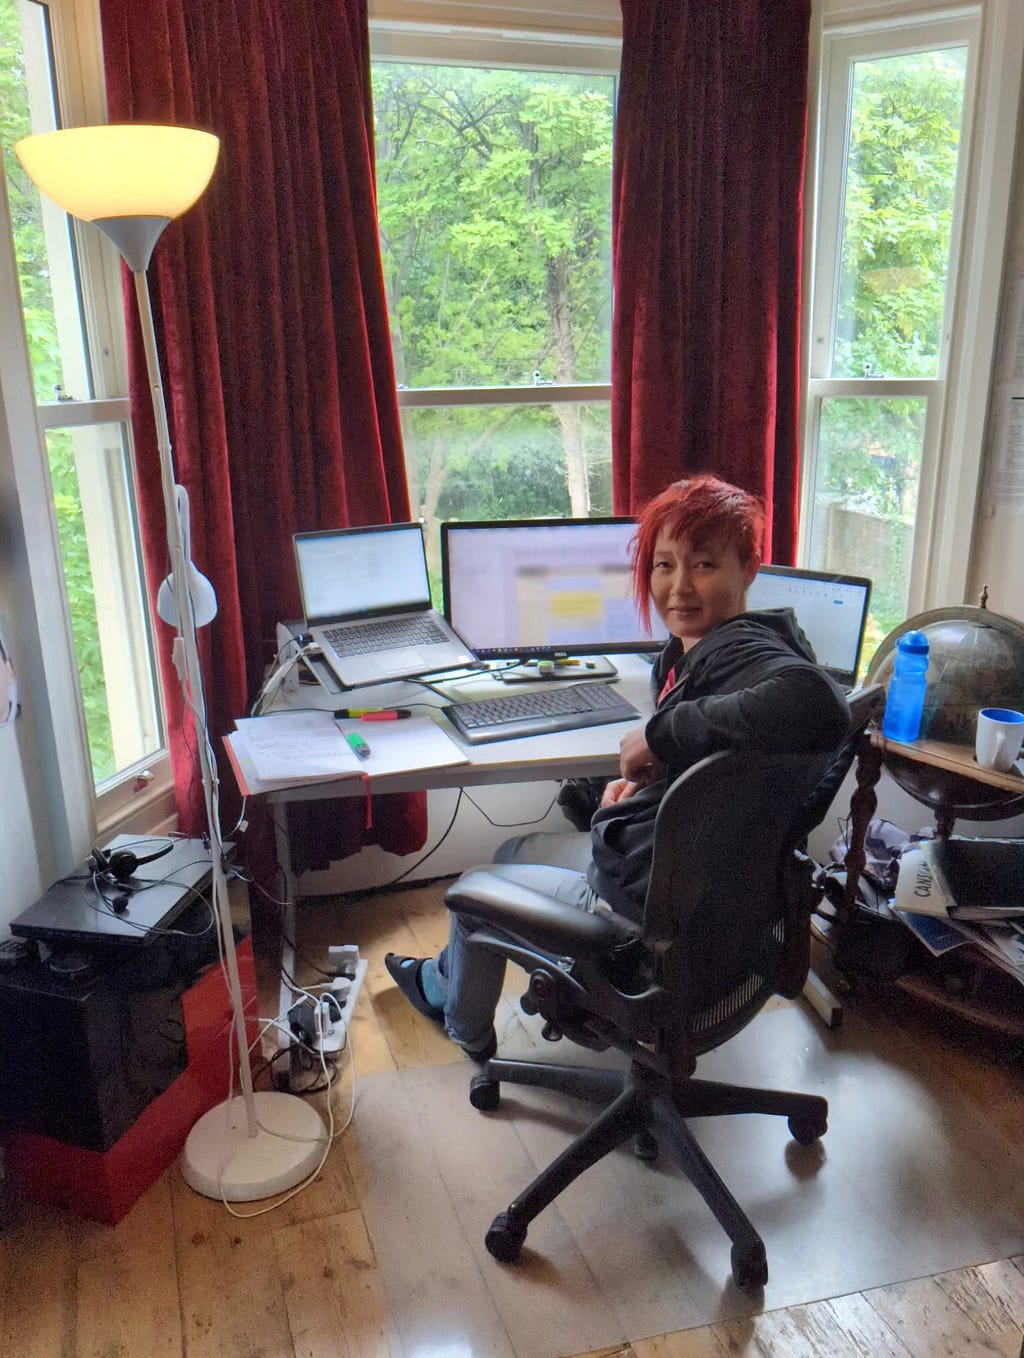 A photo of the author at her desk